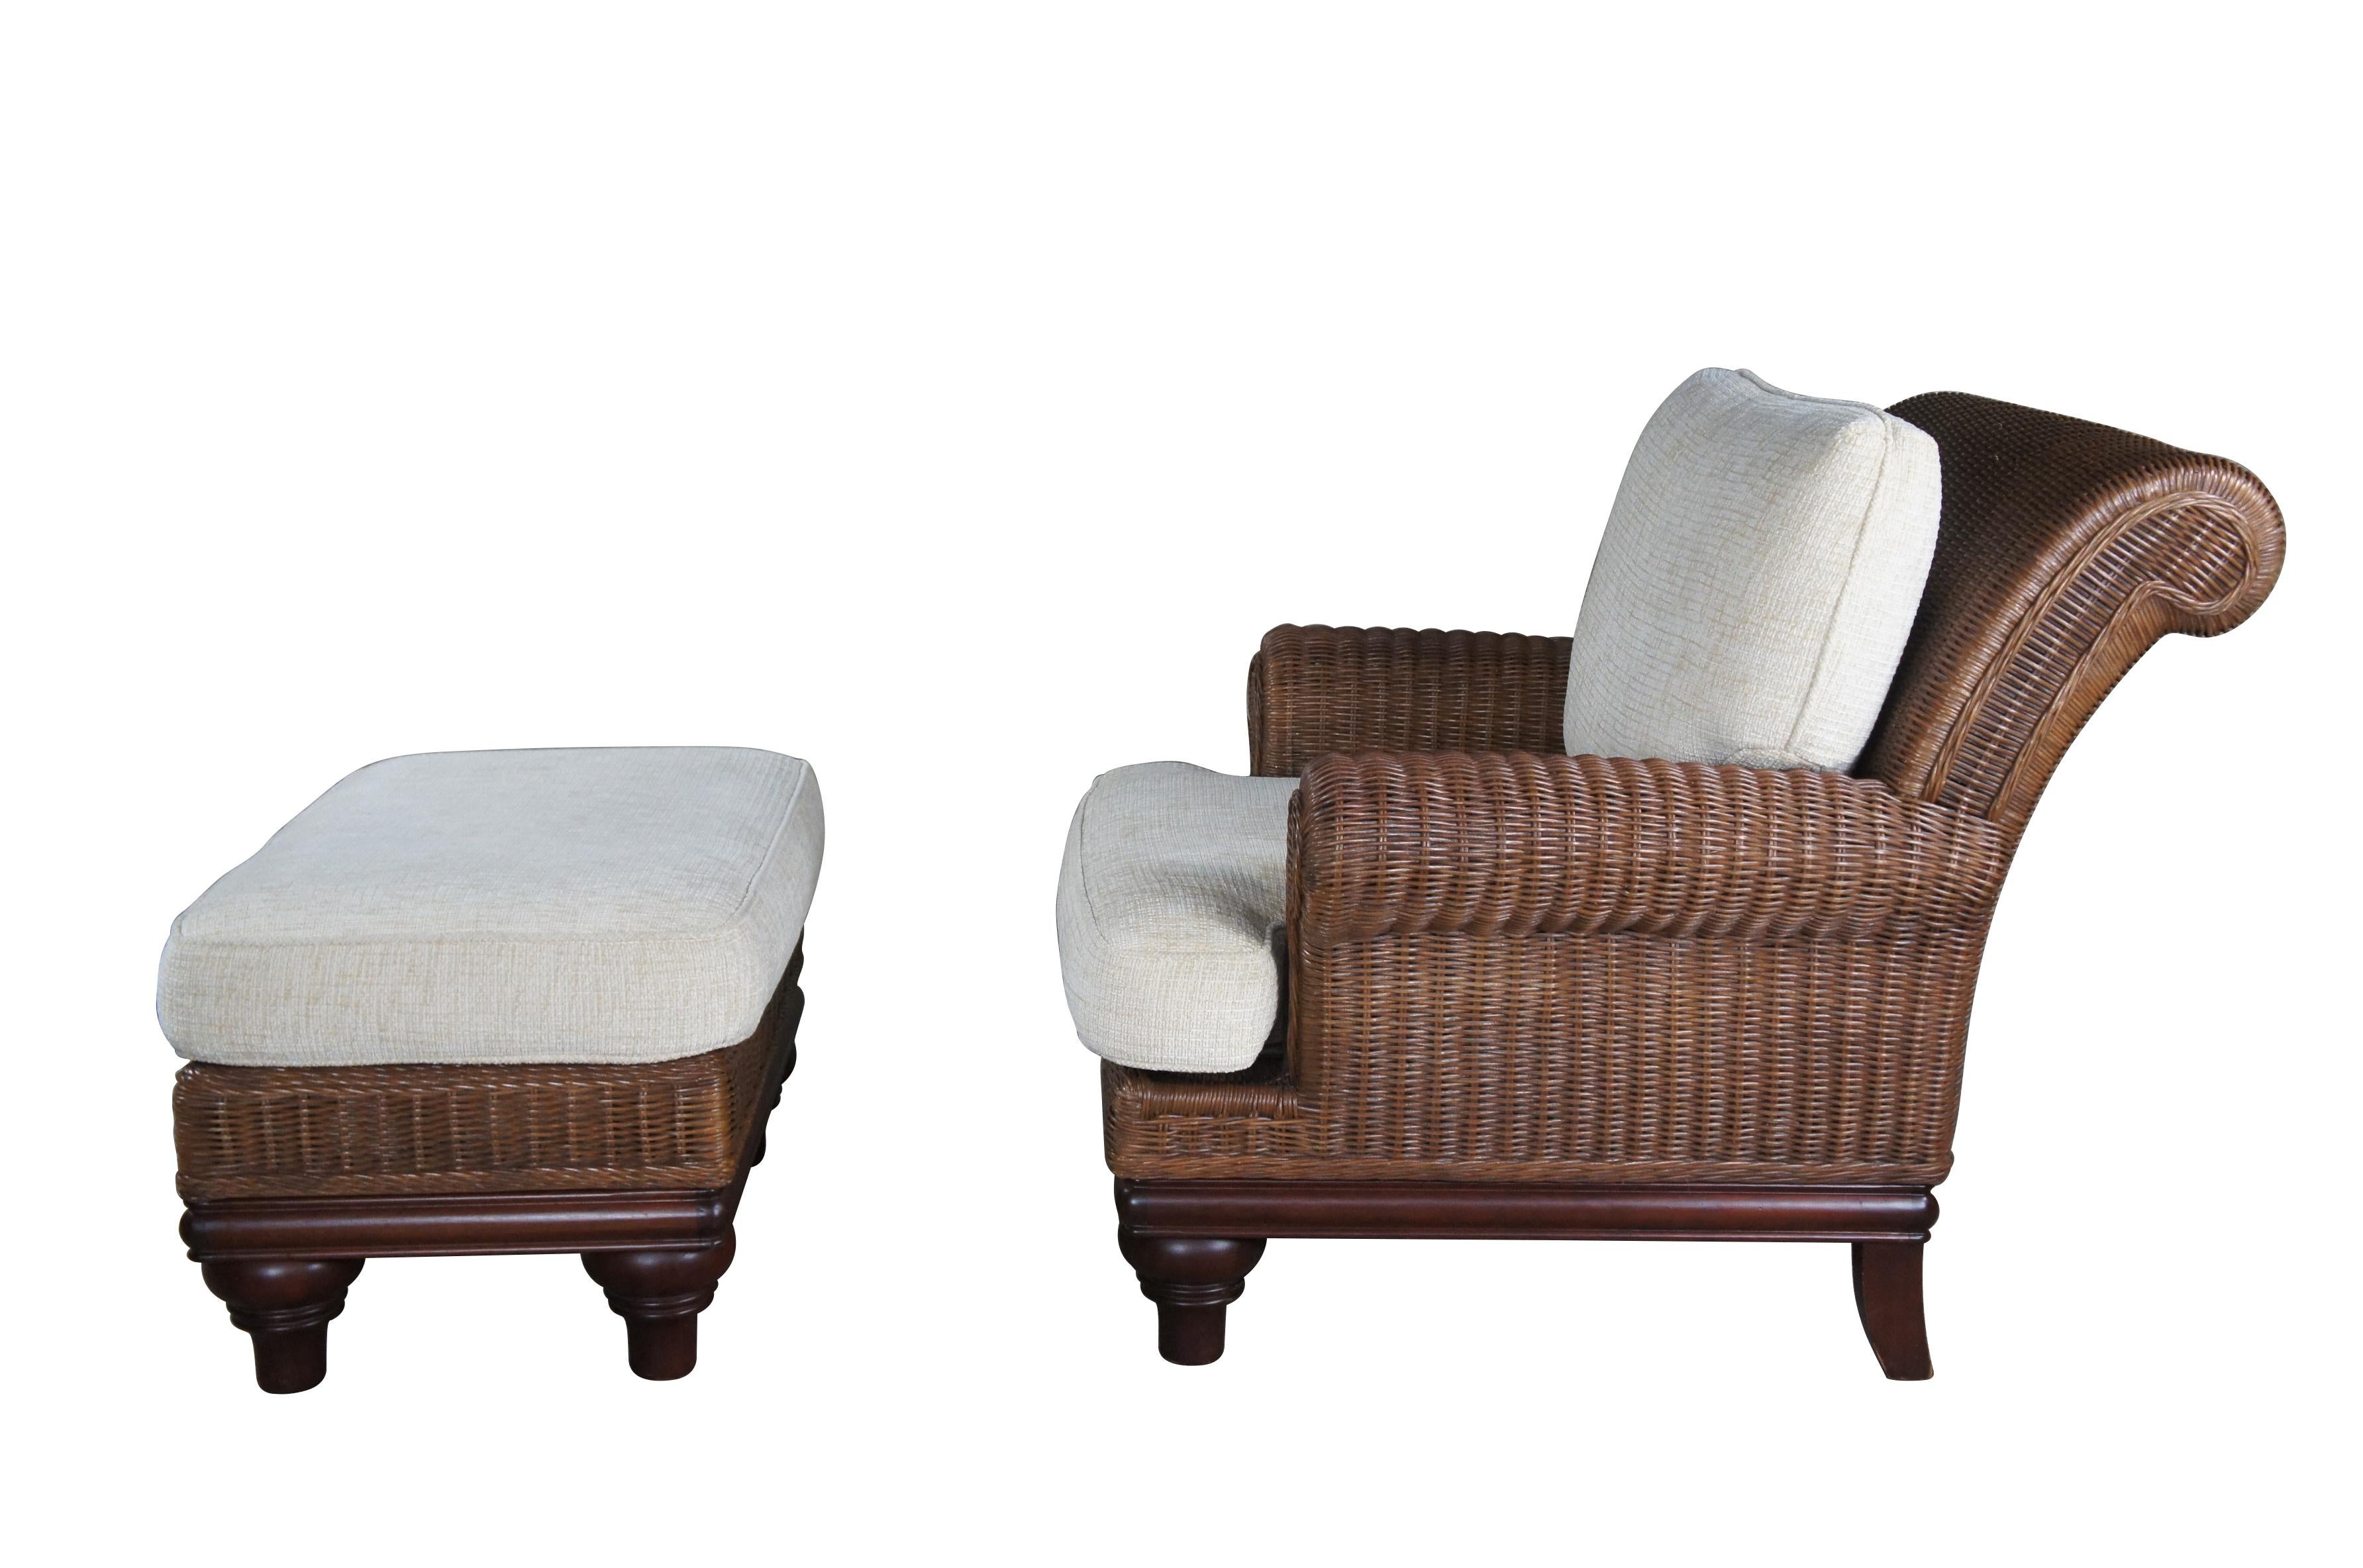 Vintage Lexington Casuals woven rattan armchair and ottoman. Inspired by British Colonial styling.  Features a sculptural frame with rolled arms beige cushions and a mahogany finished base.  Rests upon turned turnip feet.  

Dimensions:
39